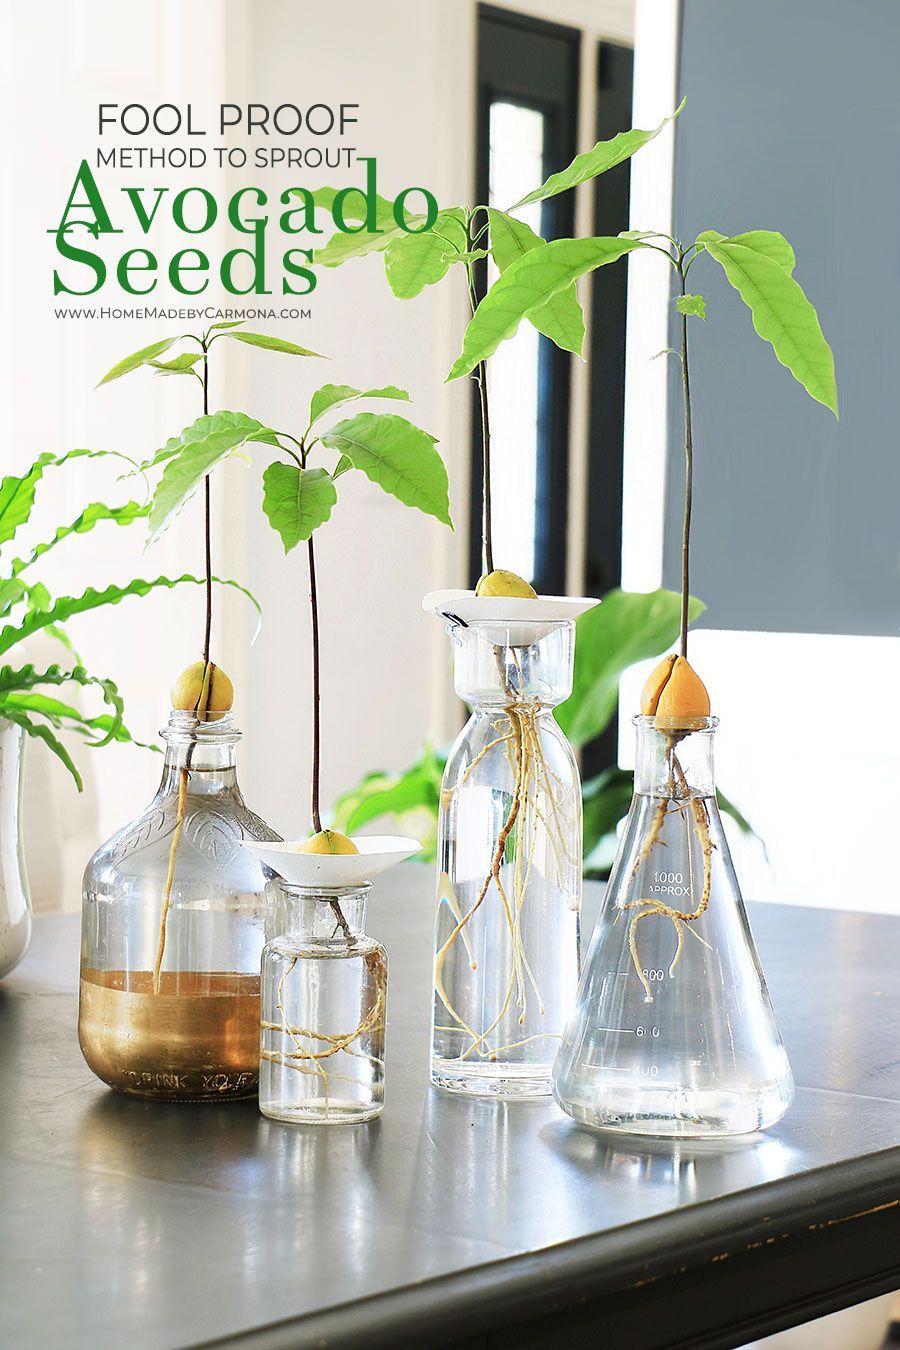 17 plants Growing from seeds ideas